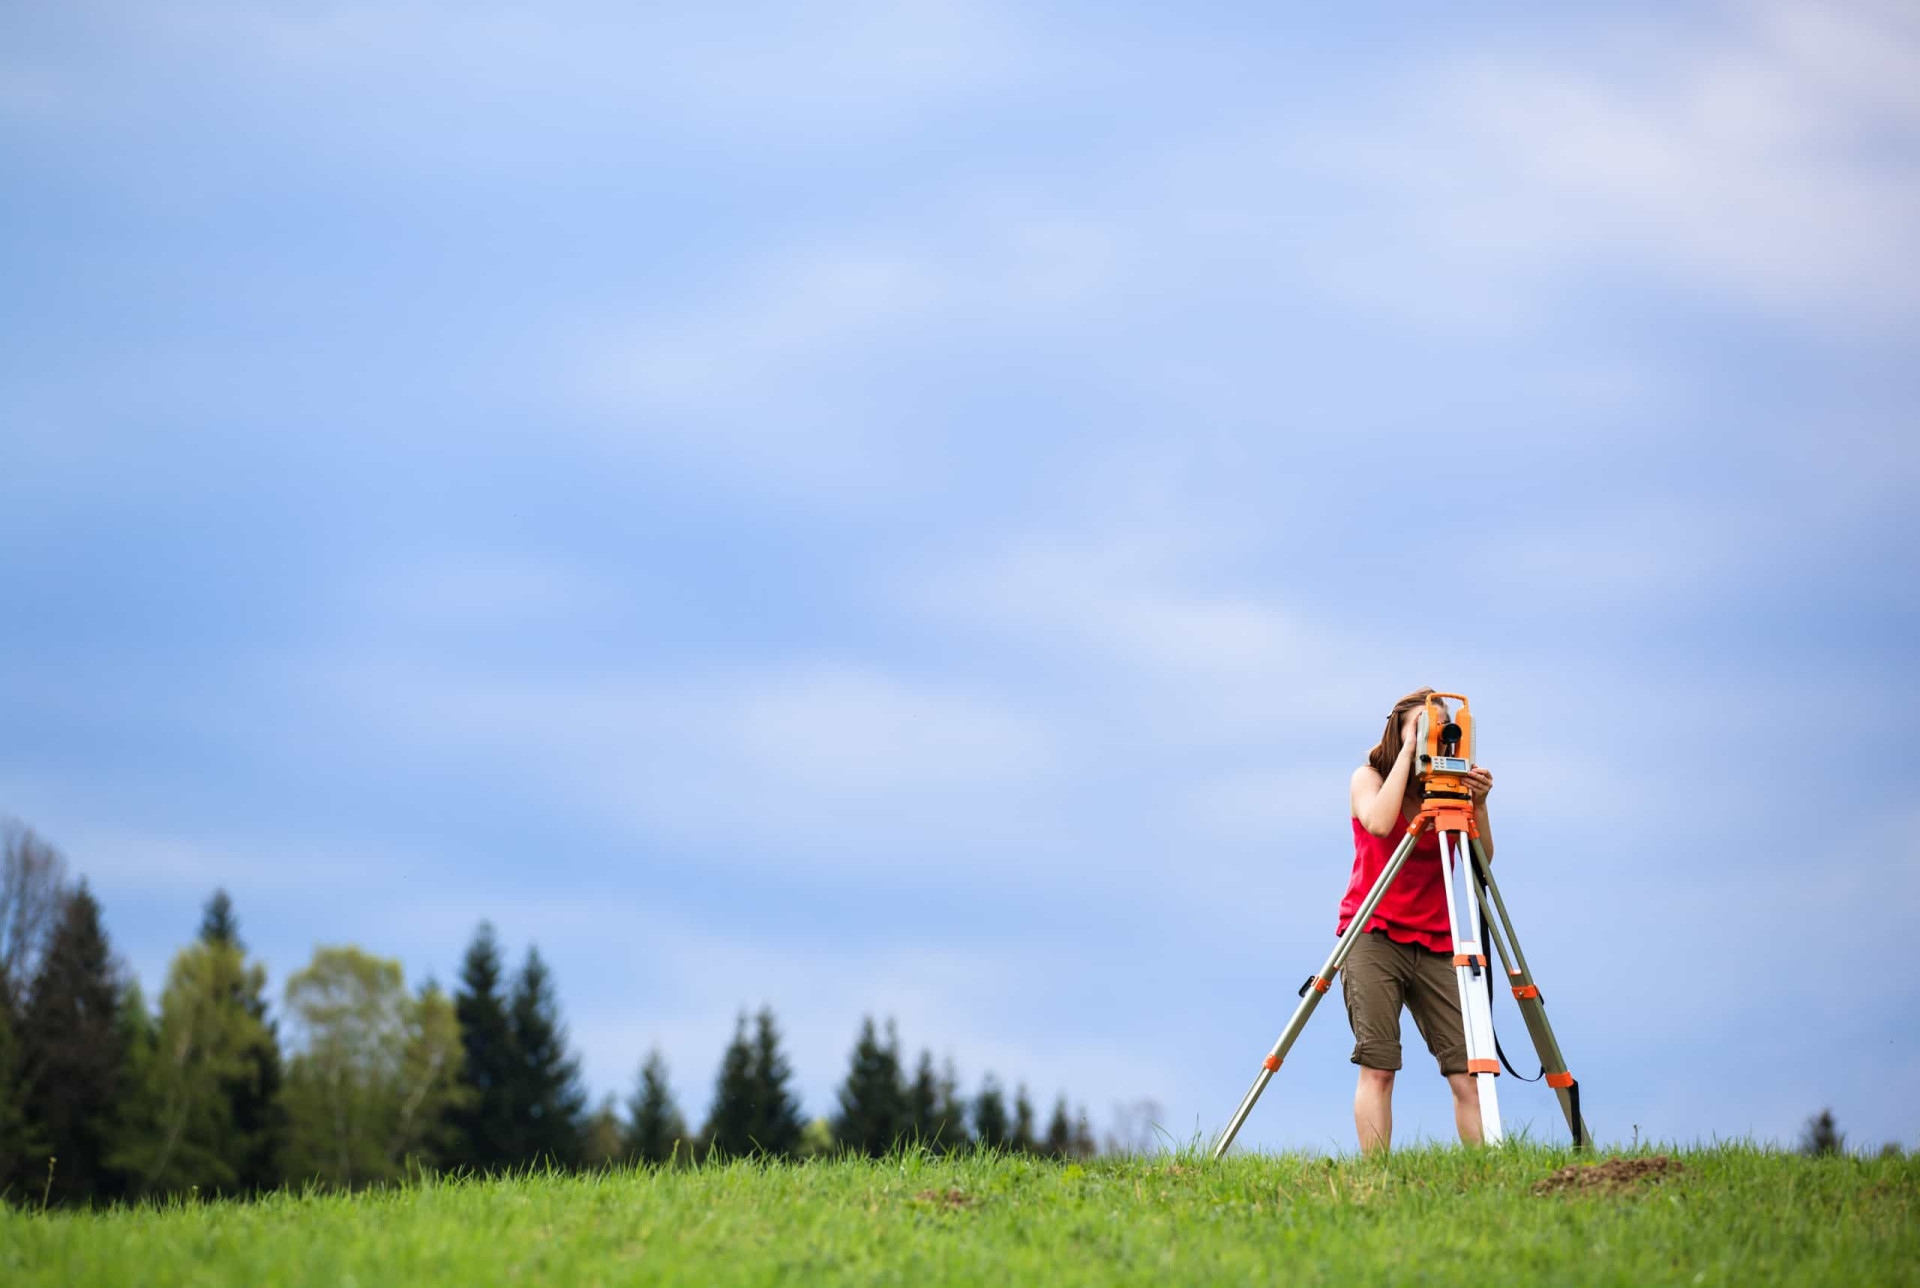 <p>The responsibilities of a land surveyor include the measuring and marking of property boundaries, and calculating the dimensions, elevations, shapes, and contours of sites for public, government, and private development. Only those with a flair for numbers and wide open spaces need apply.</p><p><a href="https://www.msn.com/en-us/community/channel/vid-7xx8mnucu55yw63we9va2gwr7uihbxwc68fxqp25x6tg4ftibpra?cvid=94631541bc0f4f89bfd59158d696ad7e">Follow us and access great exclusive content every day</a></p>